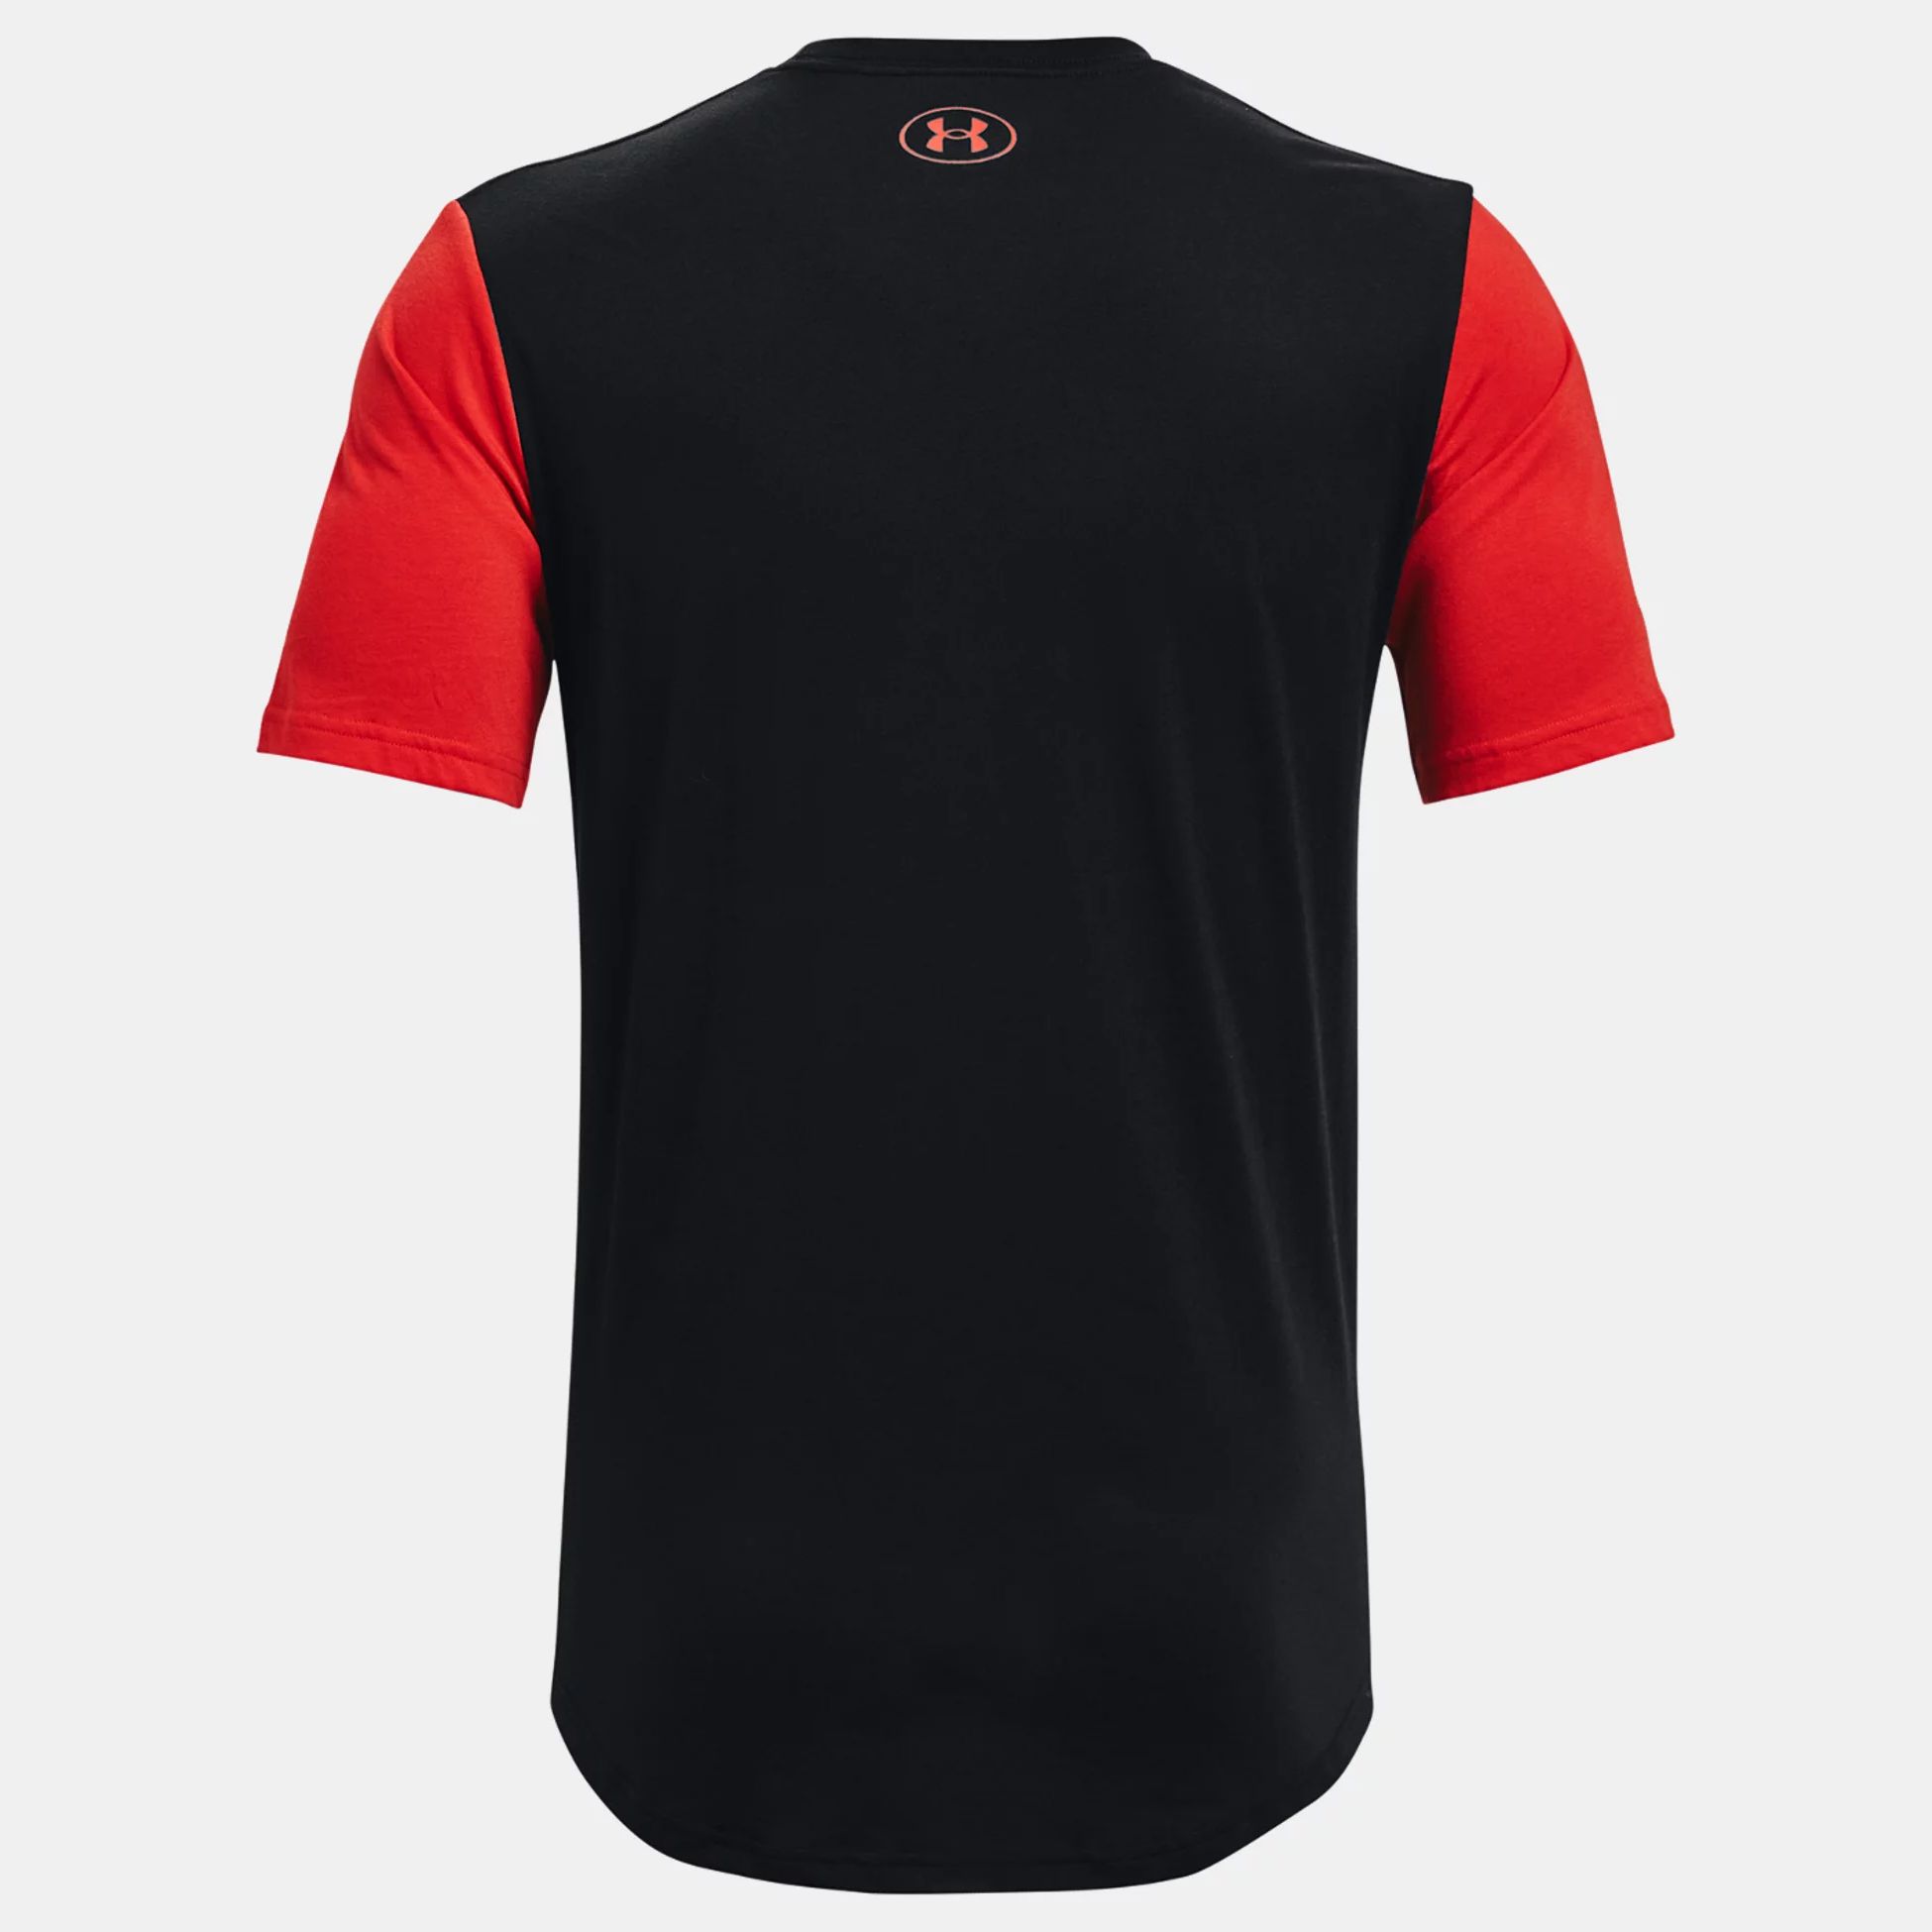 T-Shirts & Polo -  under armour UA Athletic Department Colorblock Short Sleeve